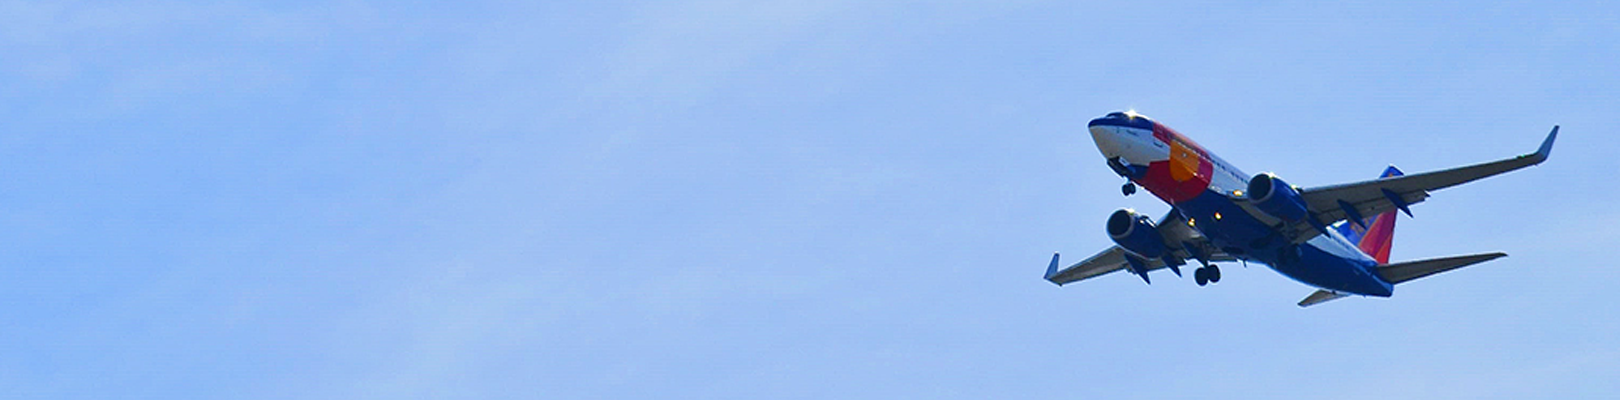 Large aircraft against blue sky